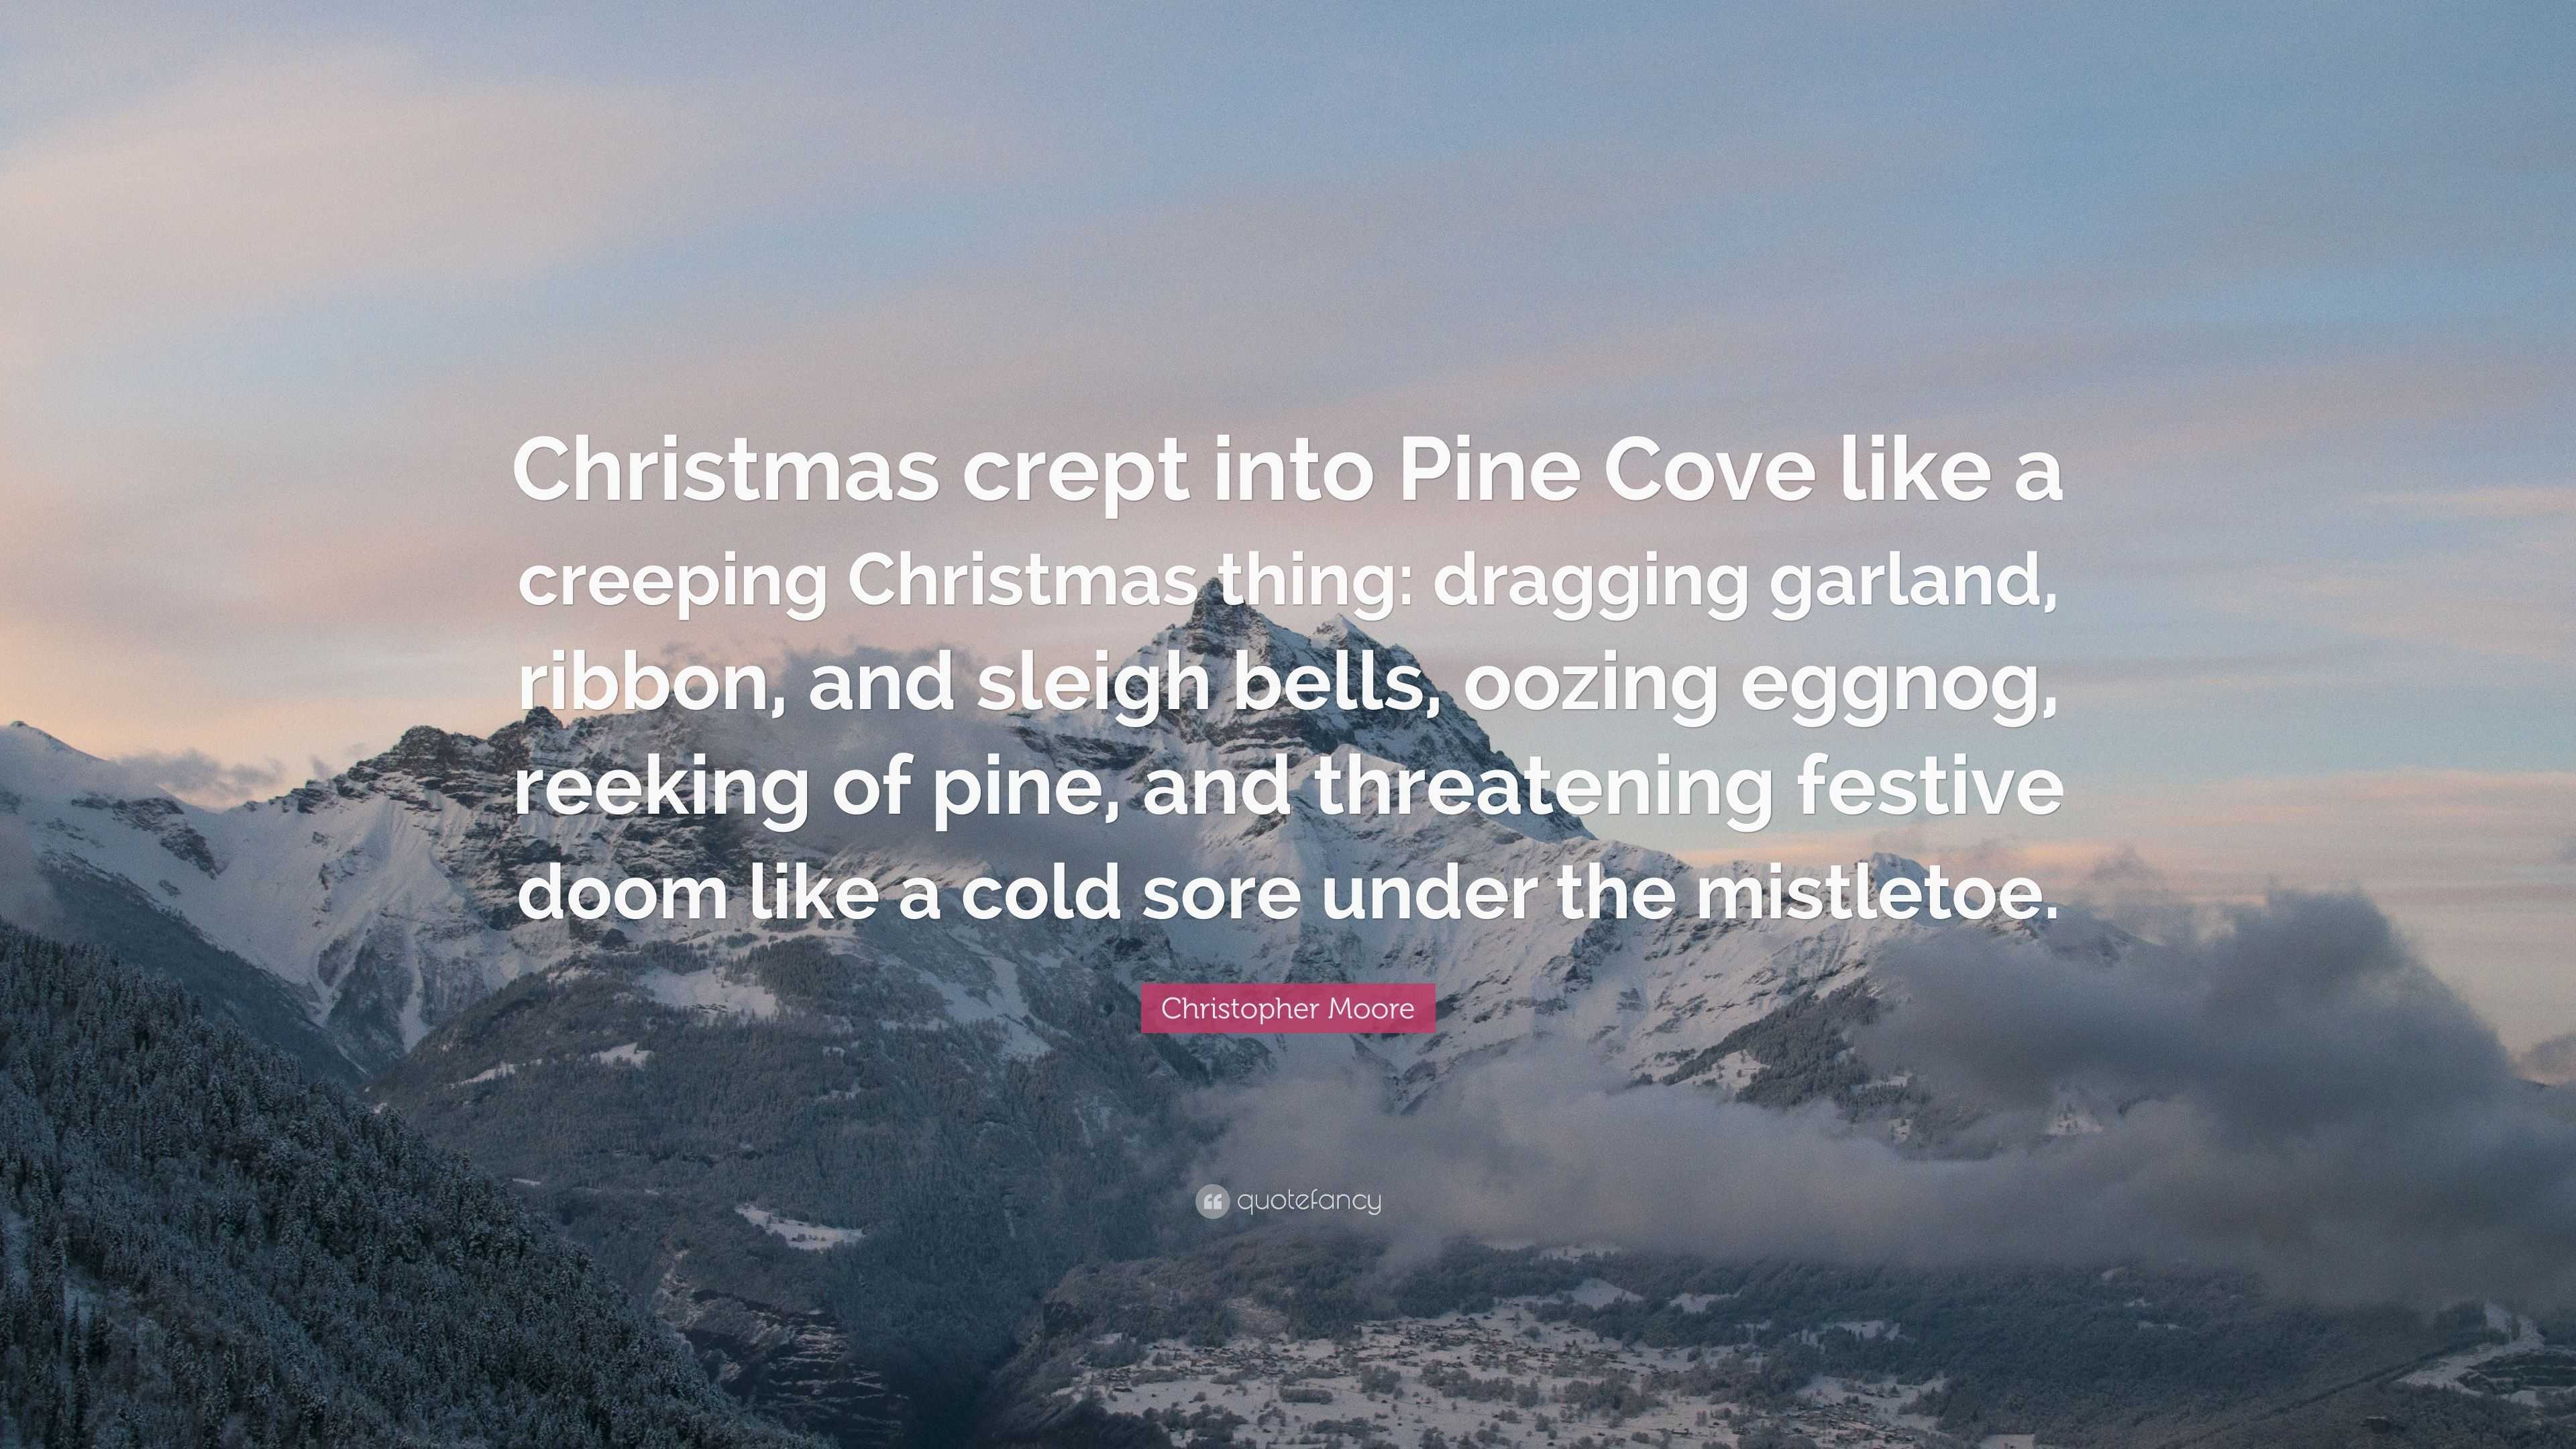 Christopher Moore Quote: “Christmas crept into Pine Cove like a ...